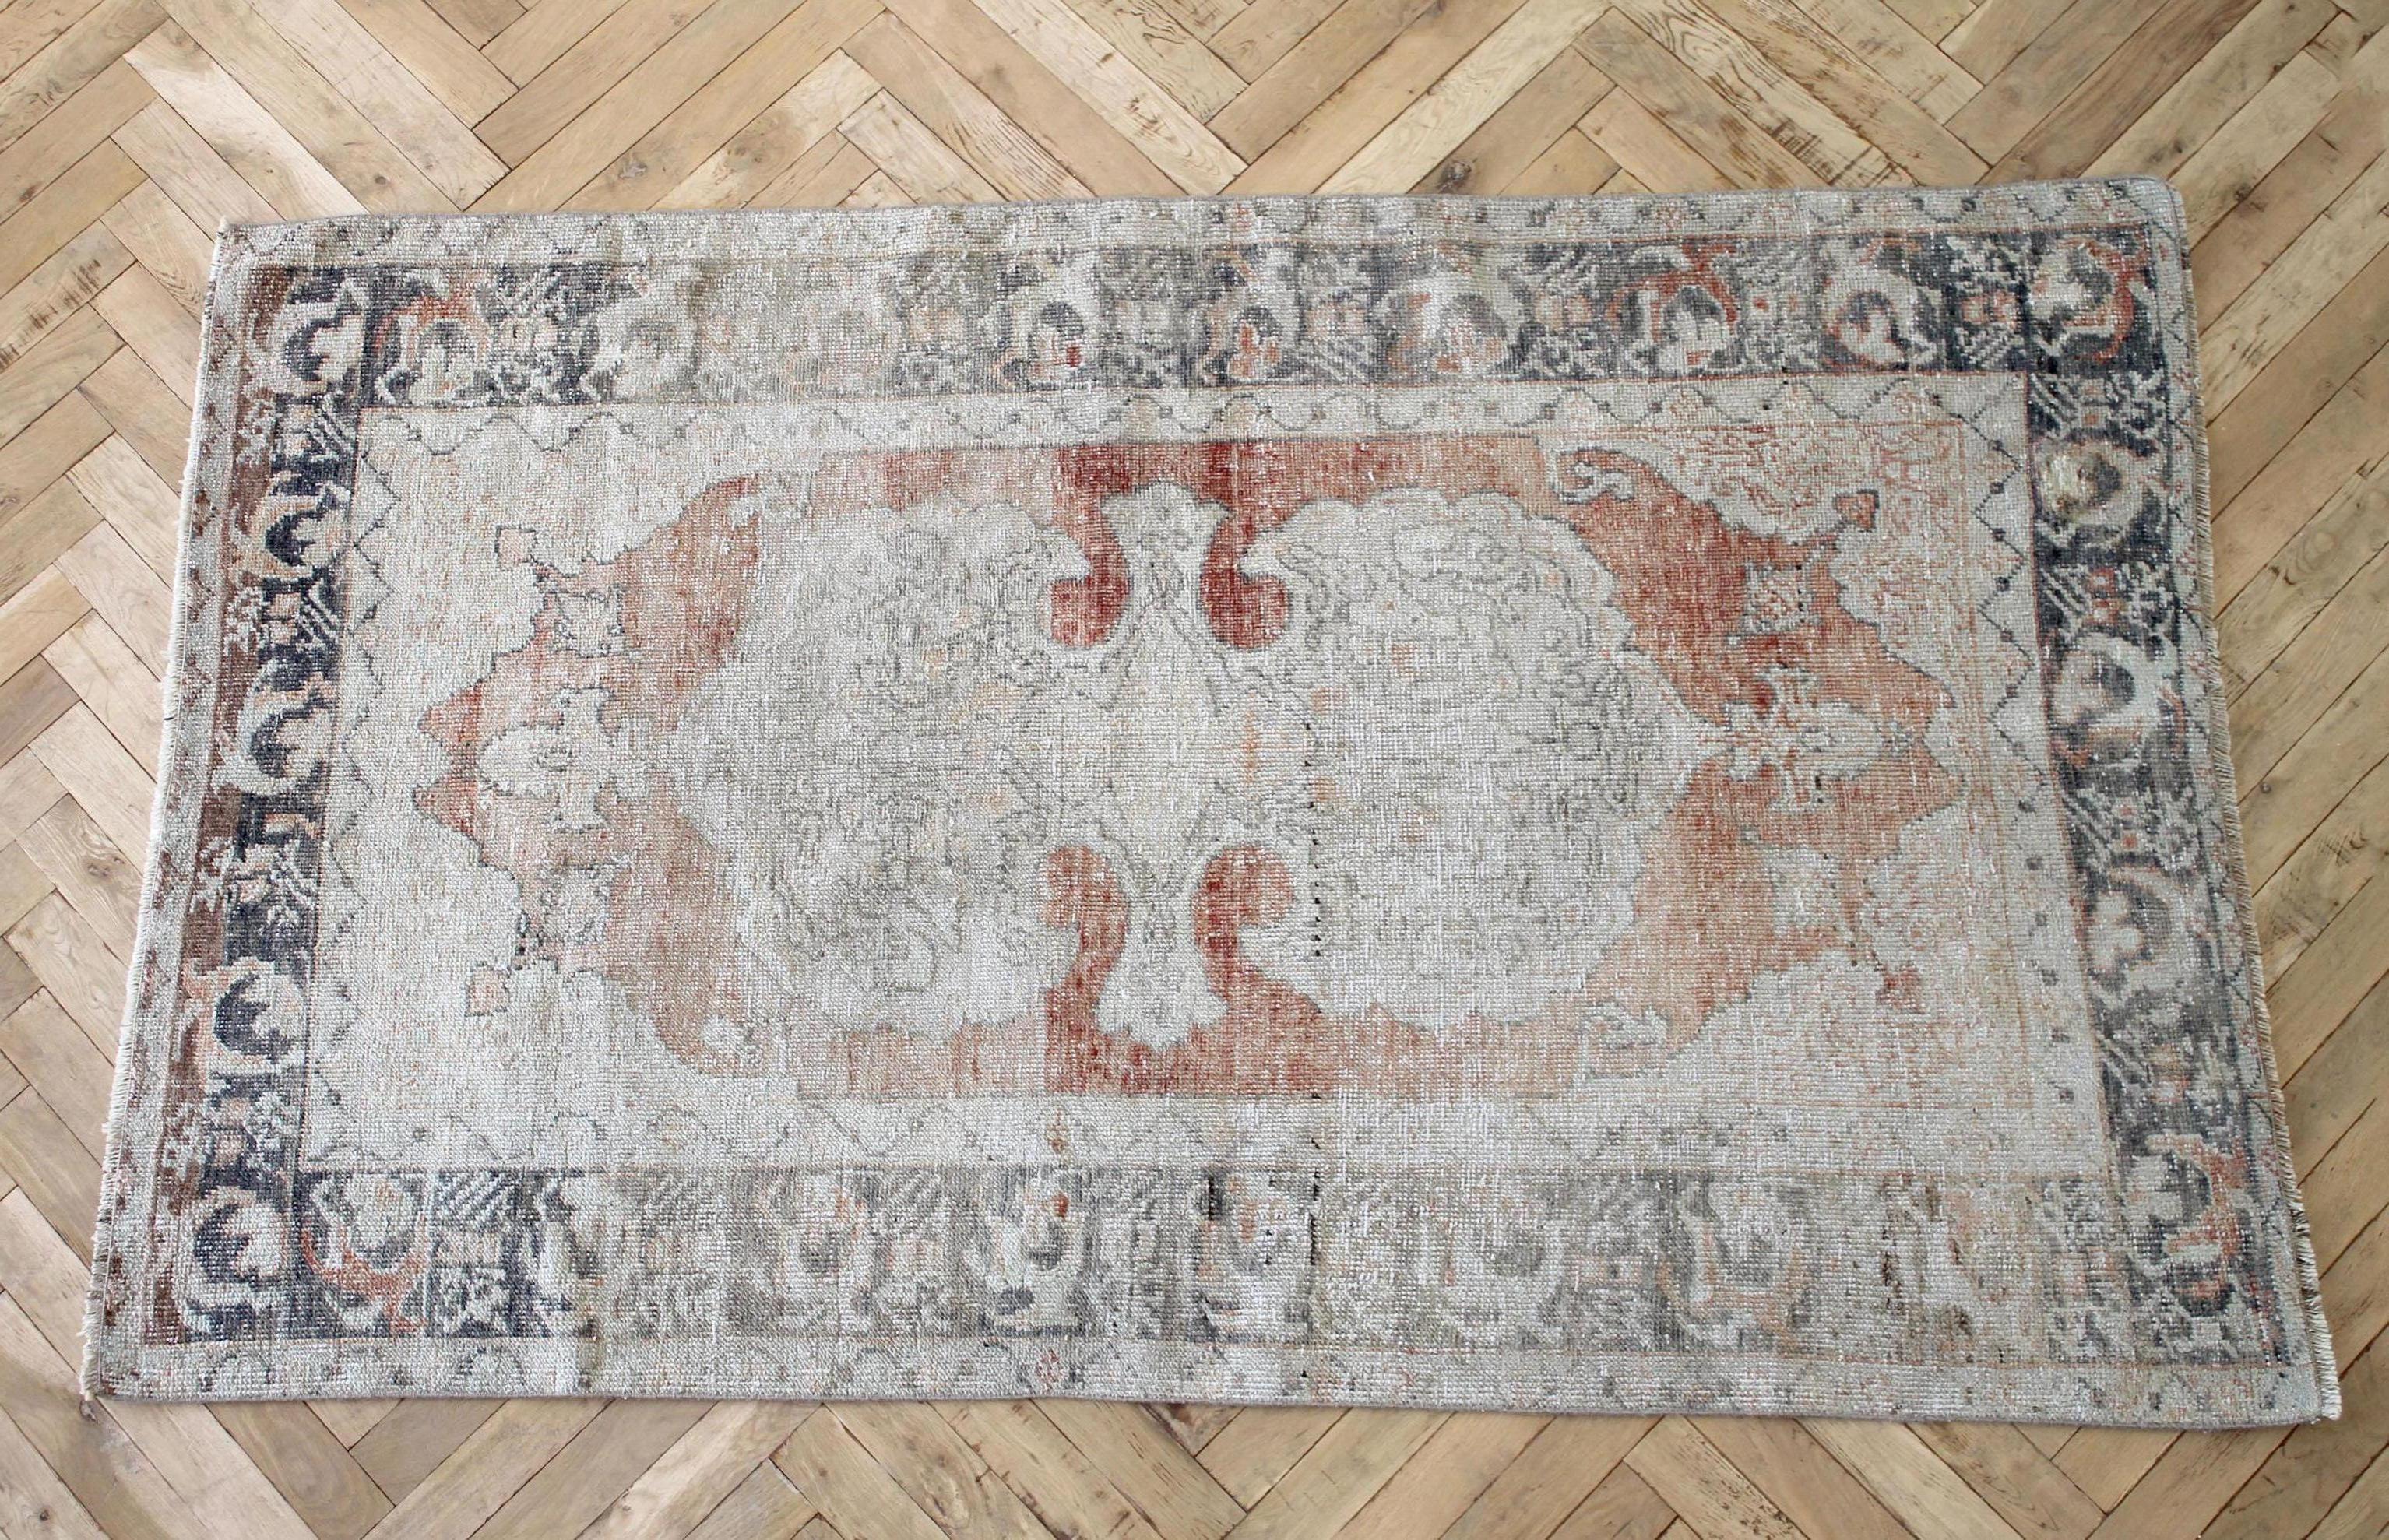 Verity vintage Turkish rug has a beautiful pattern. The warm colors as well as intricate patterns not only add character but also make the rug a one of a kind. Some pattern and color variation with vintage items is normal. This rugs contrasting